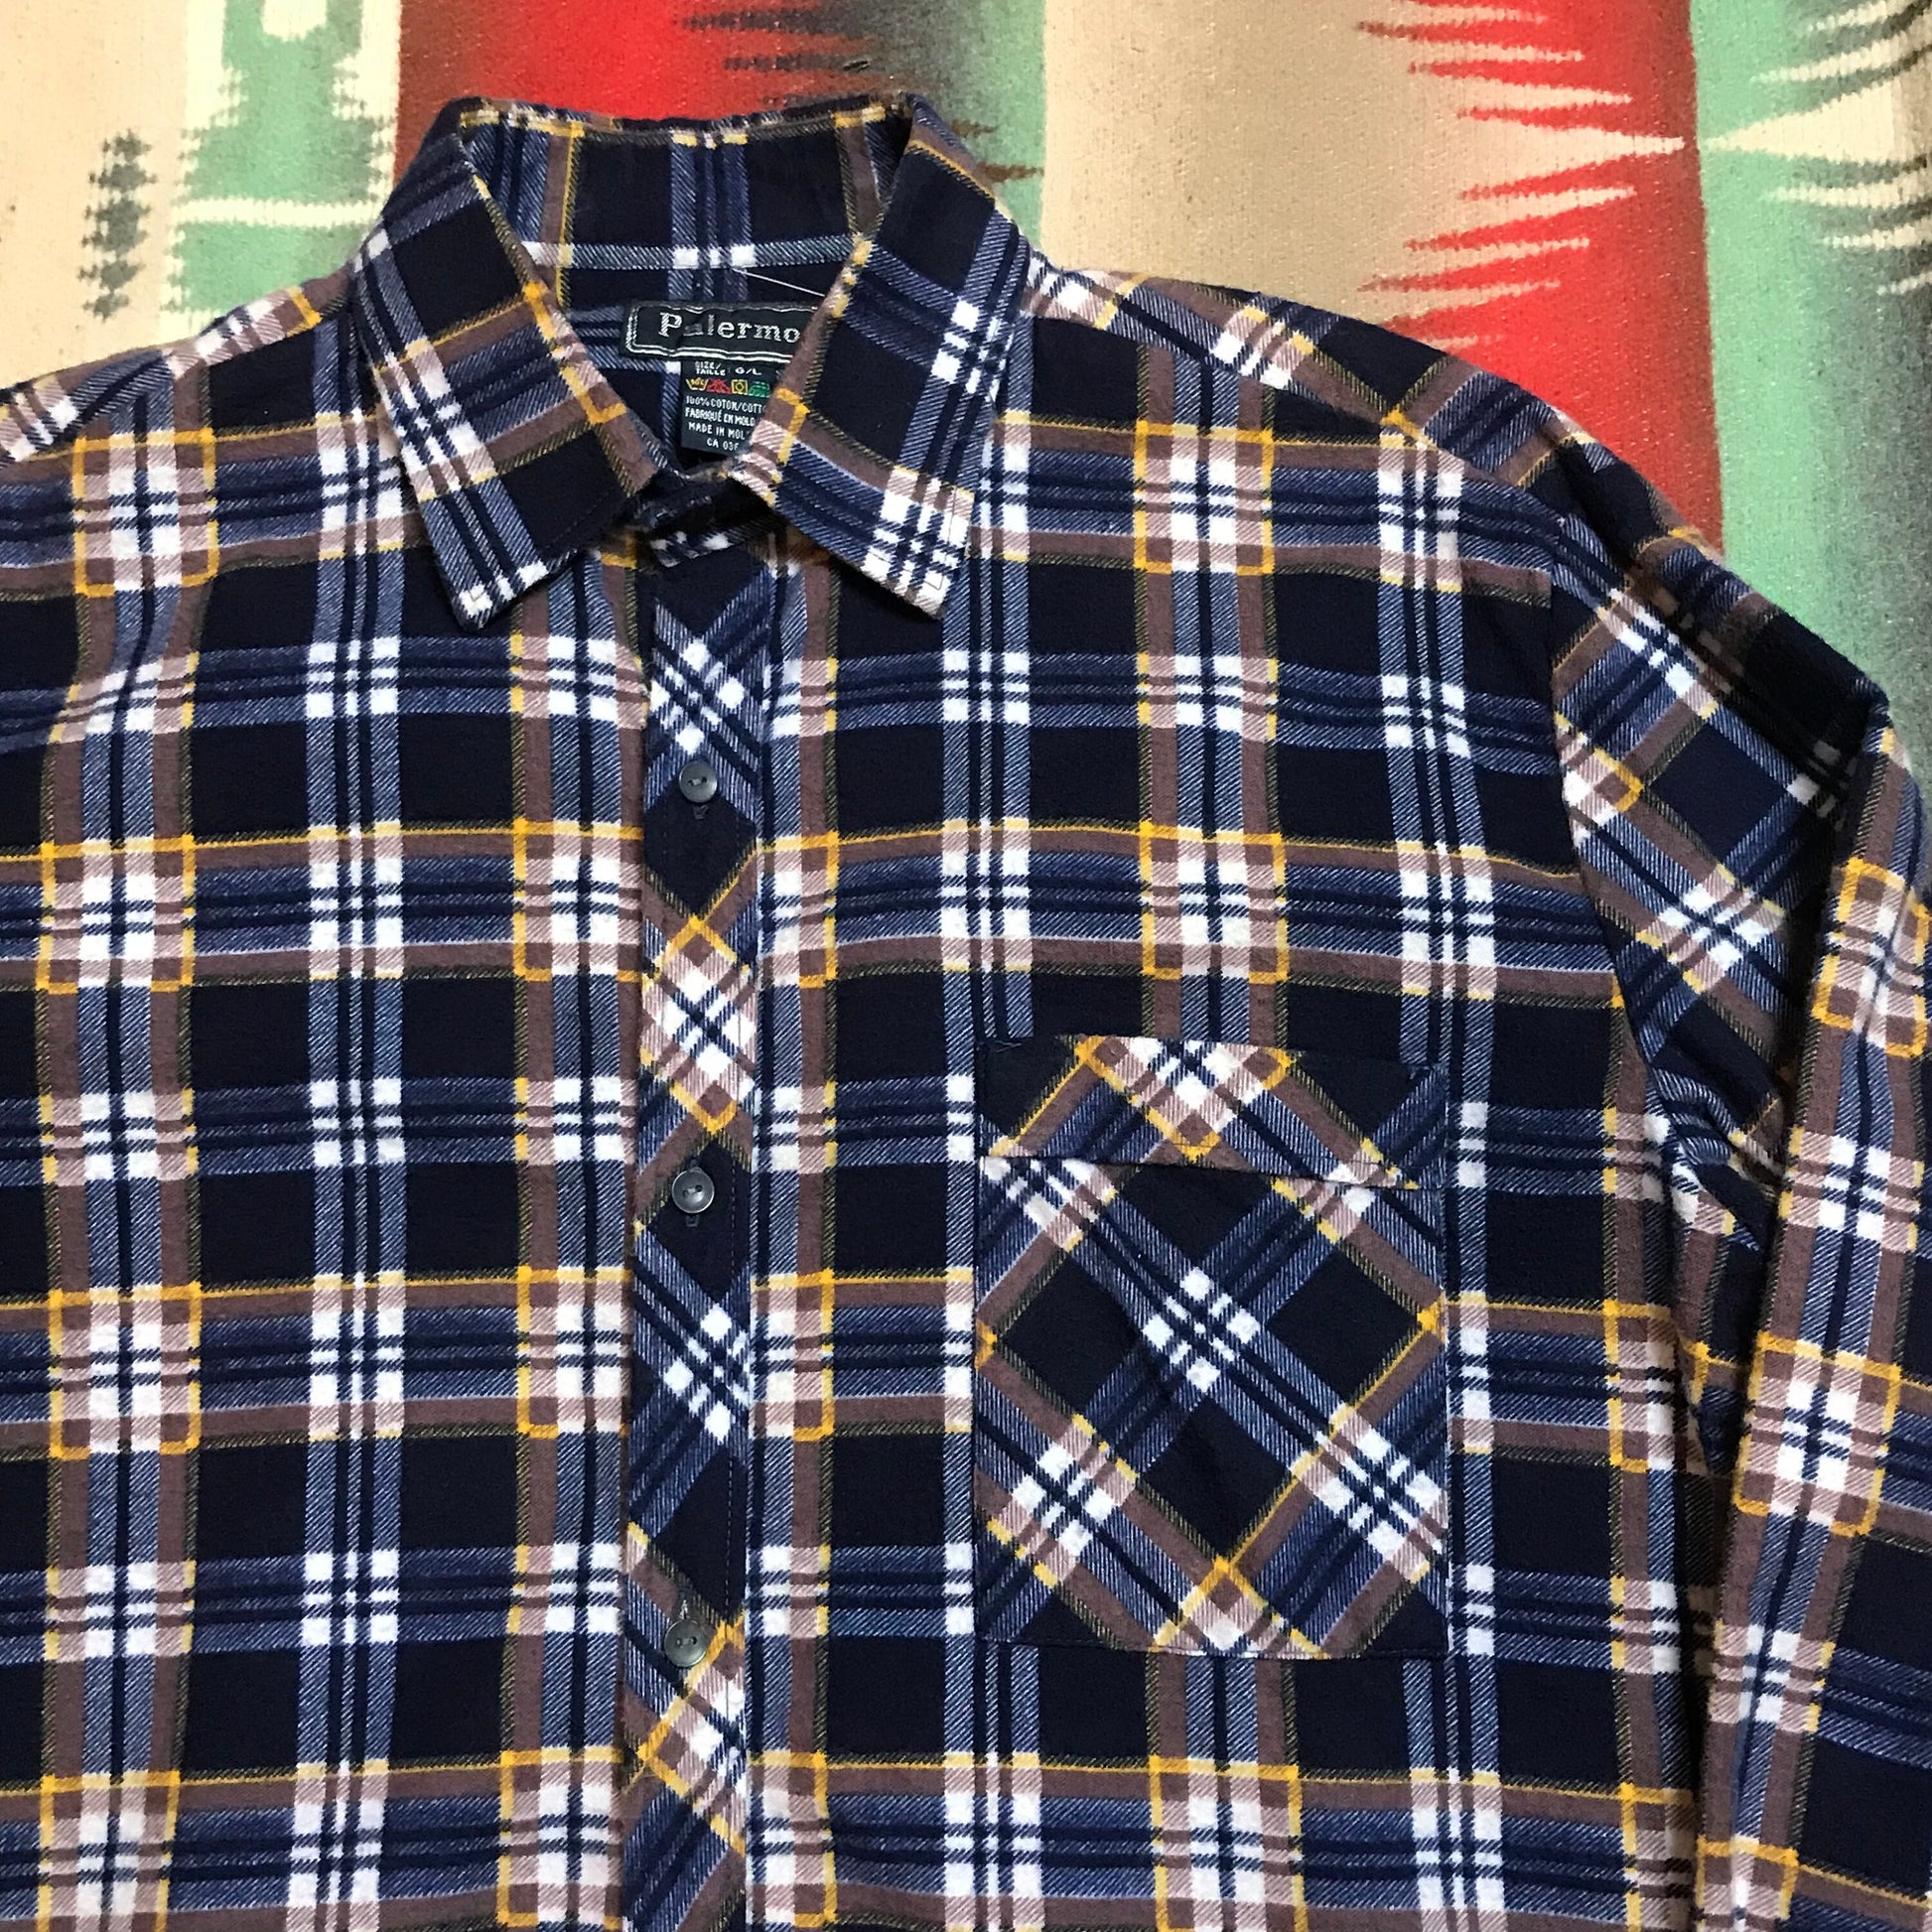 1980s Palermo Printed Cotton Flannel Shirt Size L